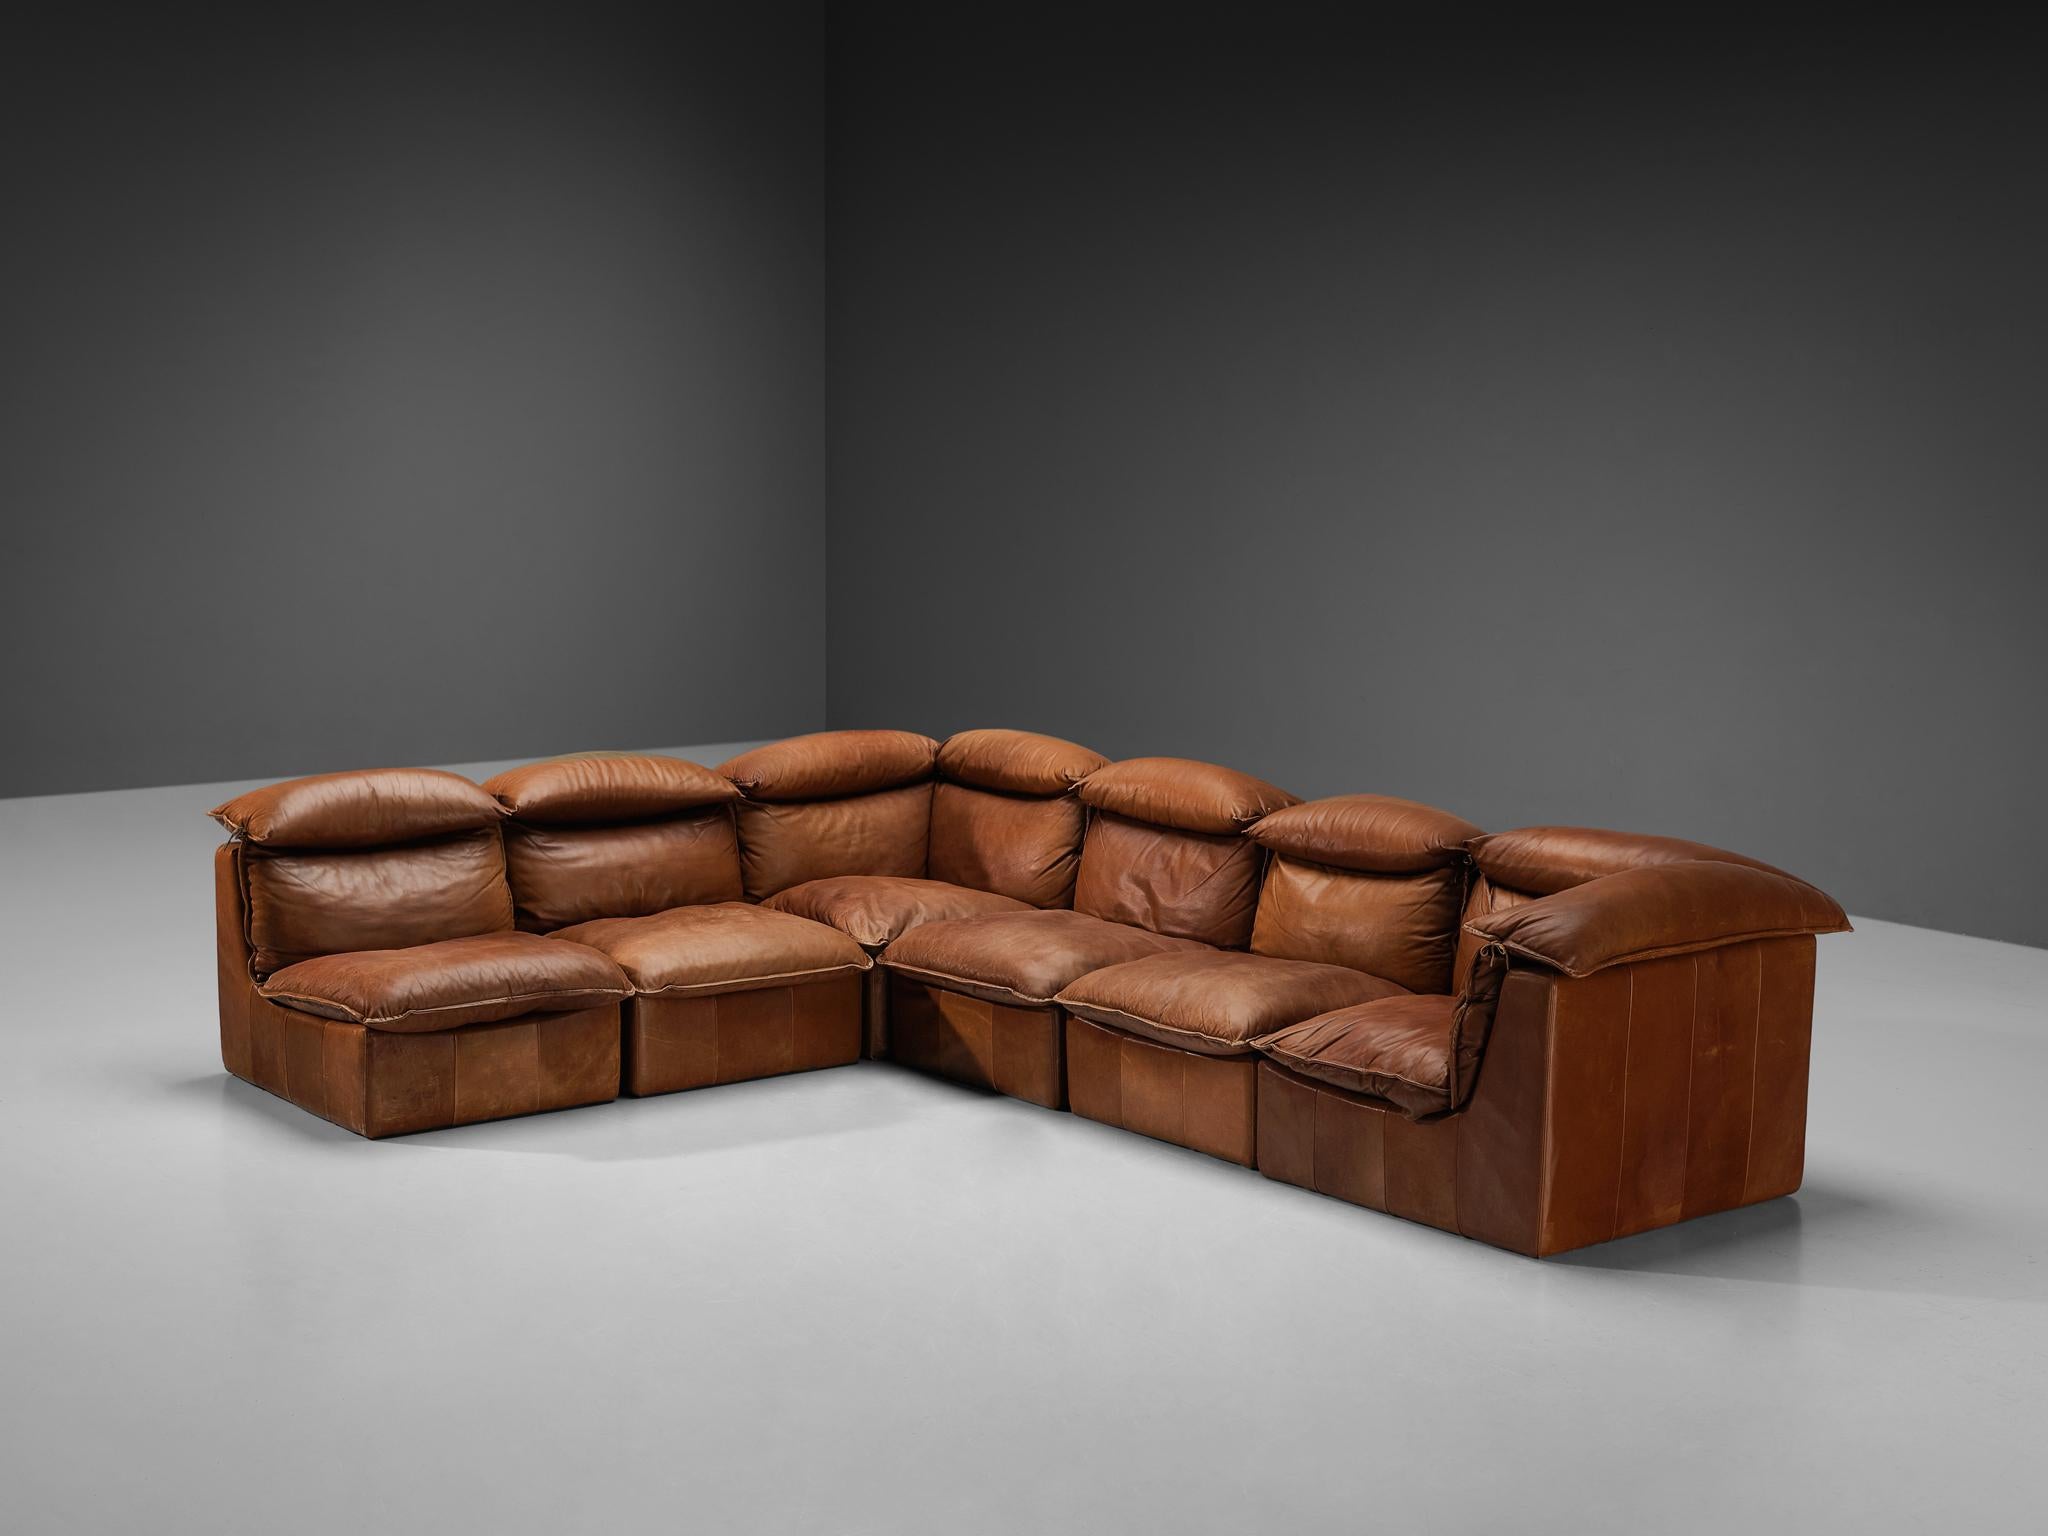 Sectional sofa, leather, Europe, 1970s.

Bulky yet elegant, this well-designed sofa is executed in warm cognac leather with admirable patina that gives this piece of furniture a strong and naturalistic character. This sofa is characterized by a